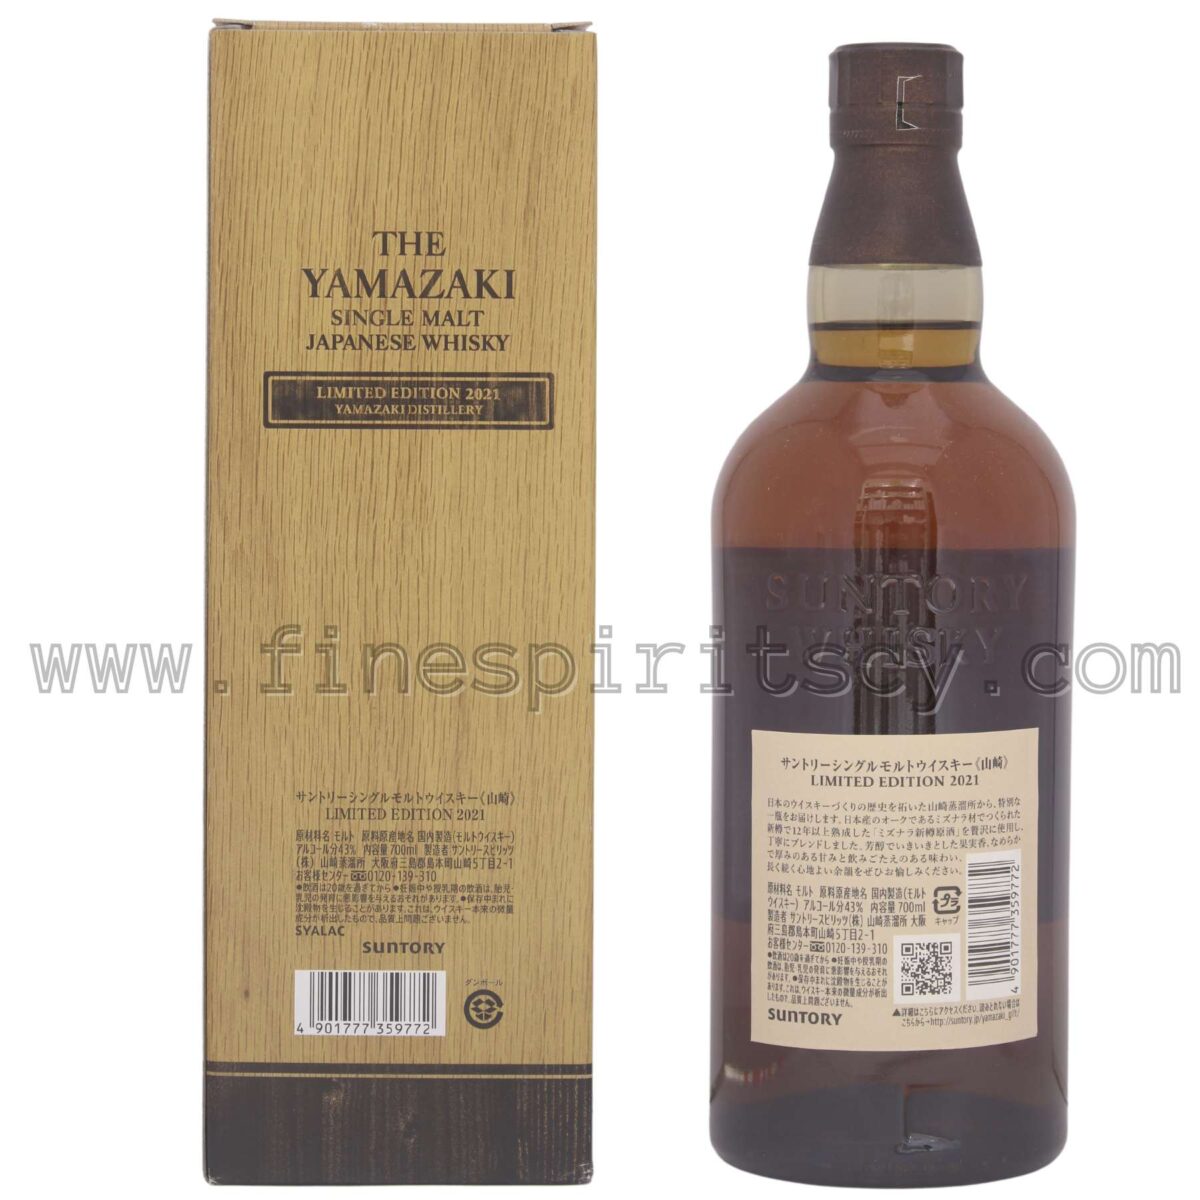 Yamazaki Limited Ed 2021 Whisky Online Shop Order Collect Rare Old Discontinued